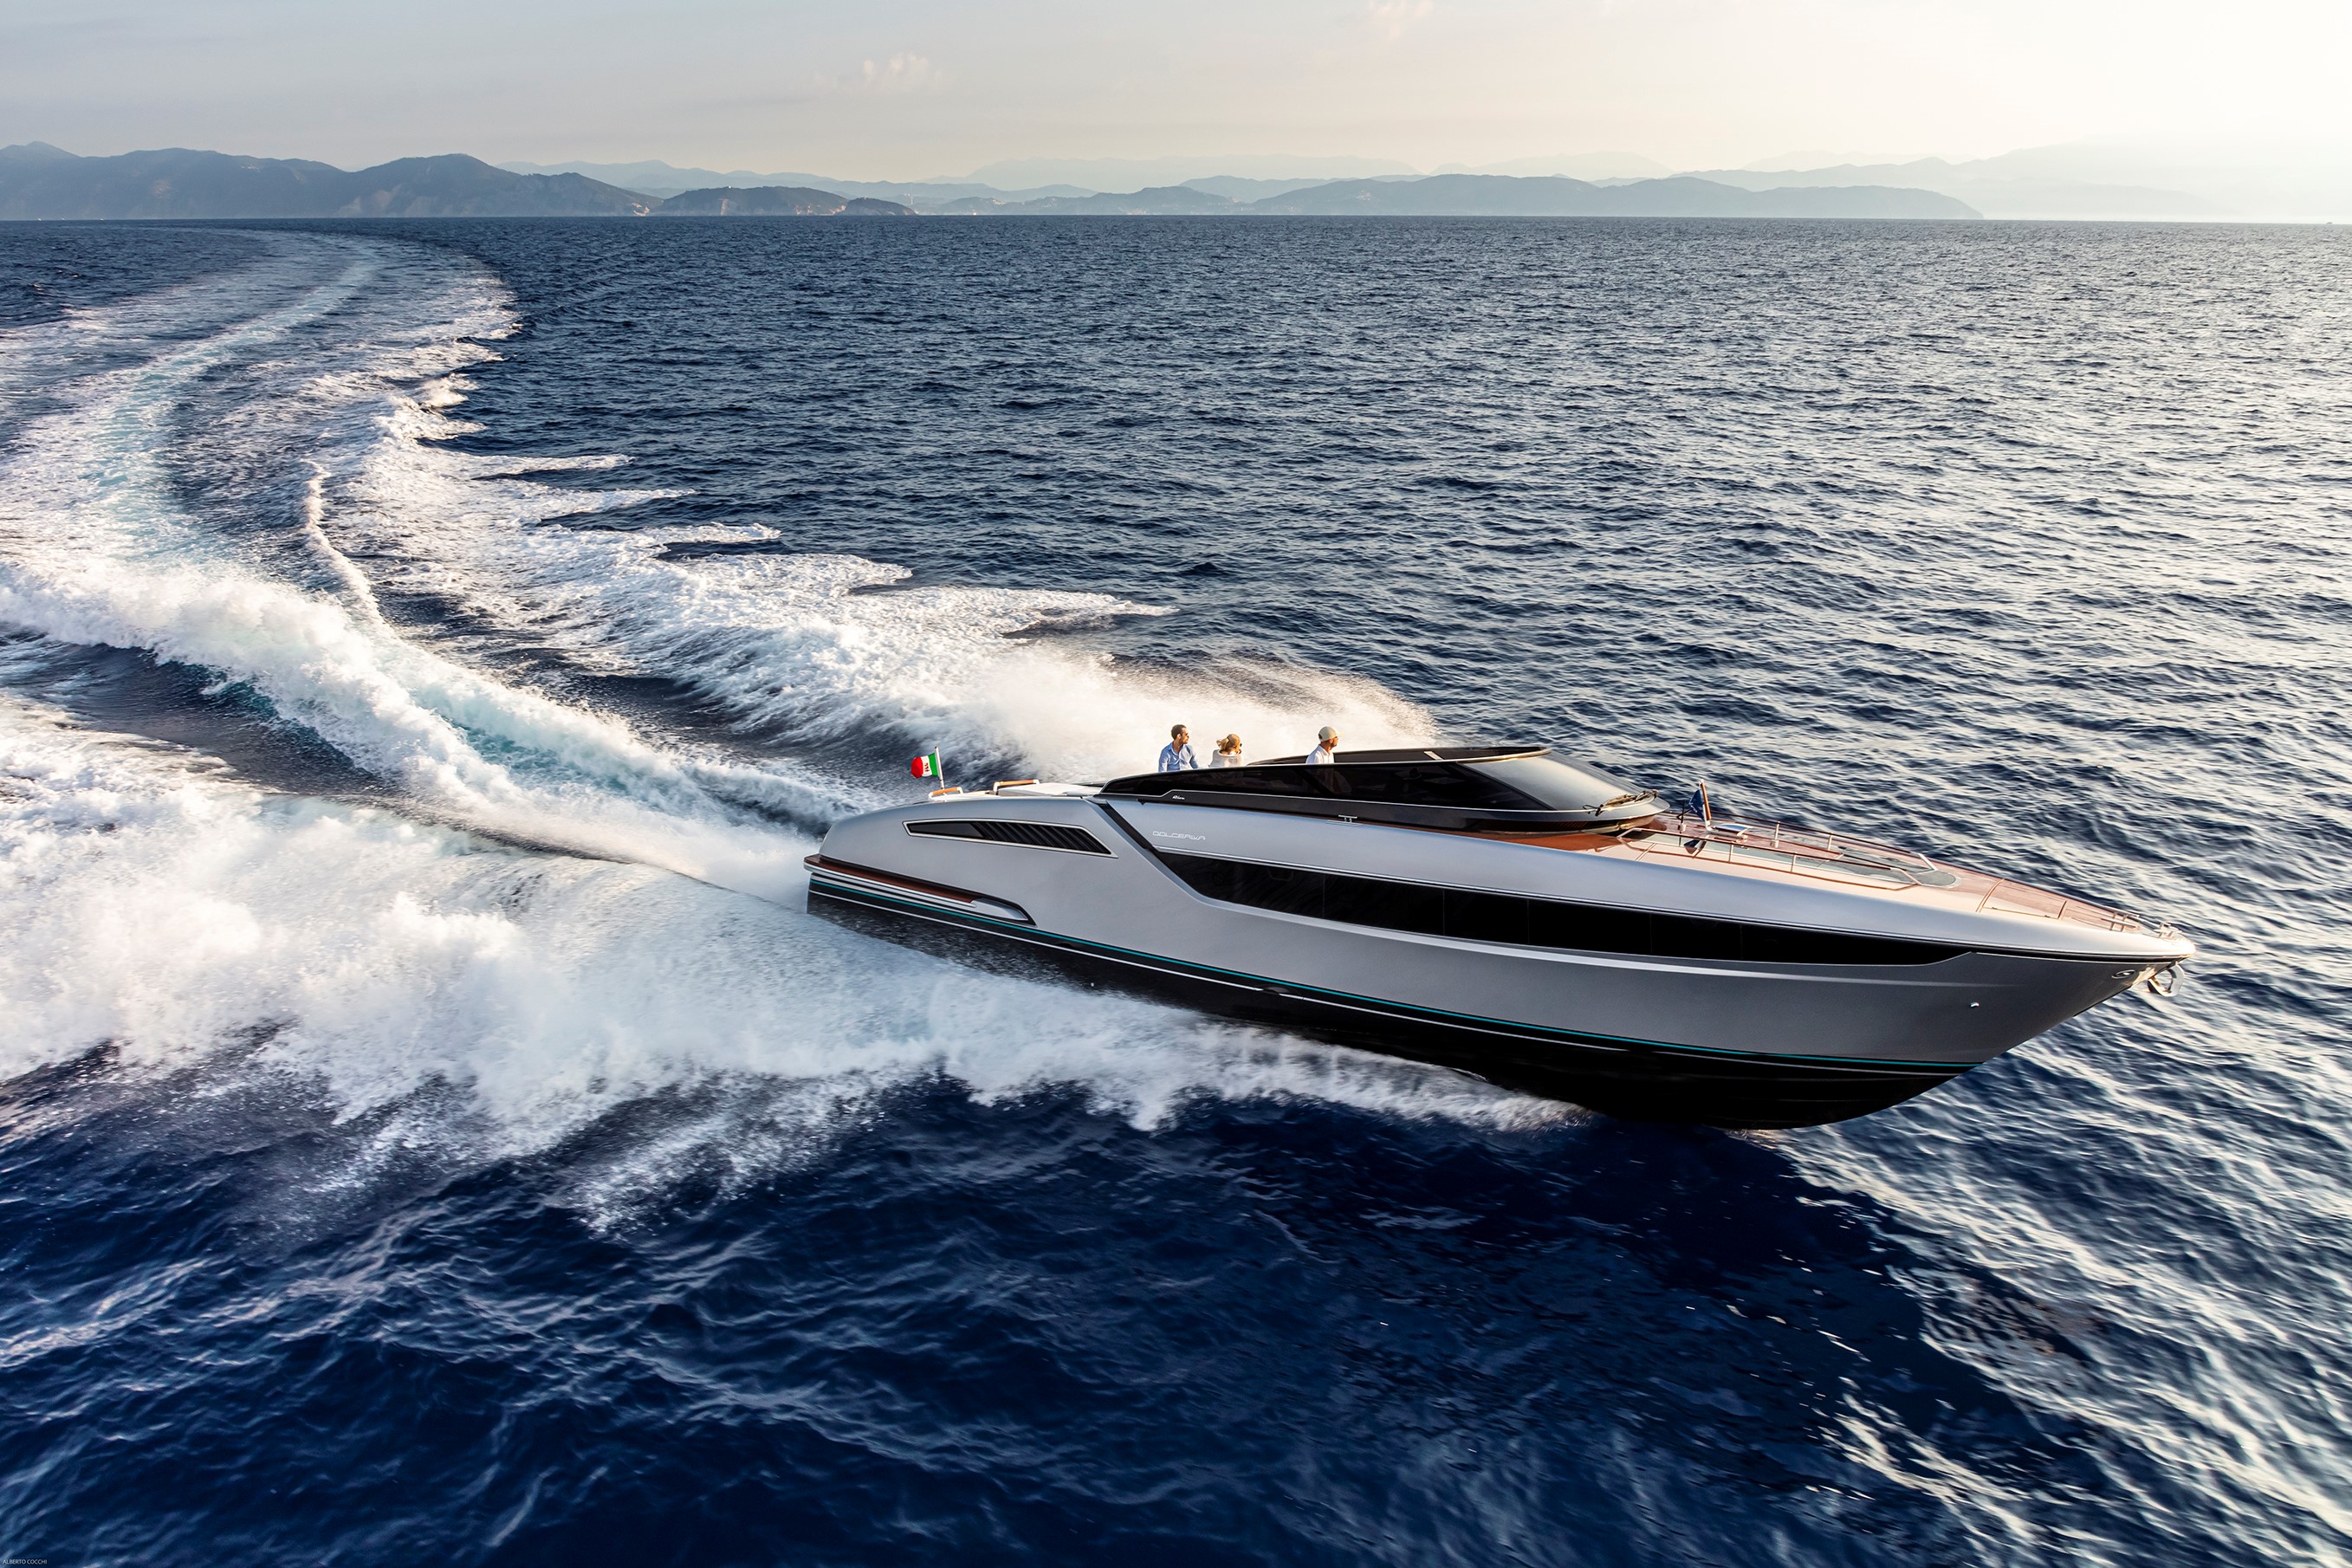 Ferretti Group presents itself at the Cannes Yachting Festival with 6 world premieres and a fleet of 26 yachts